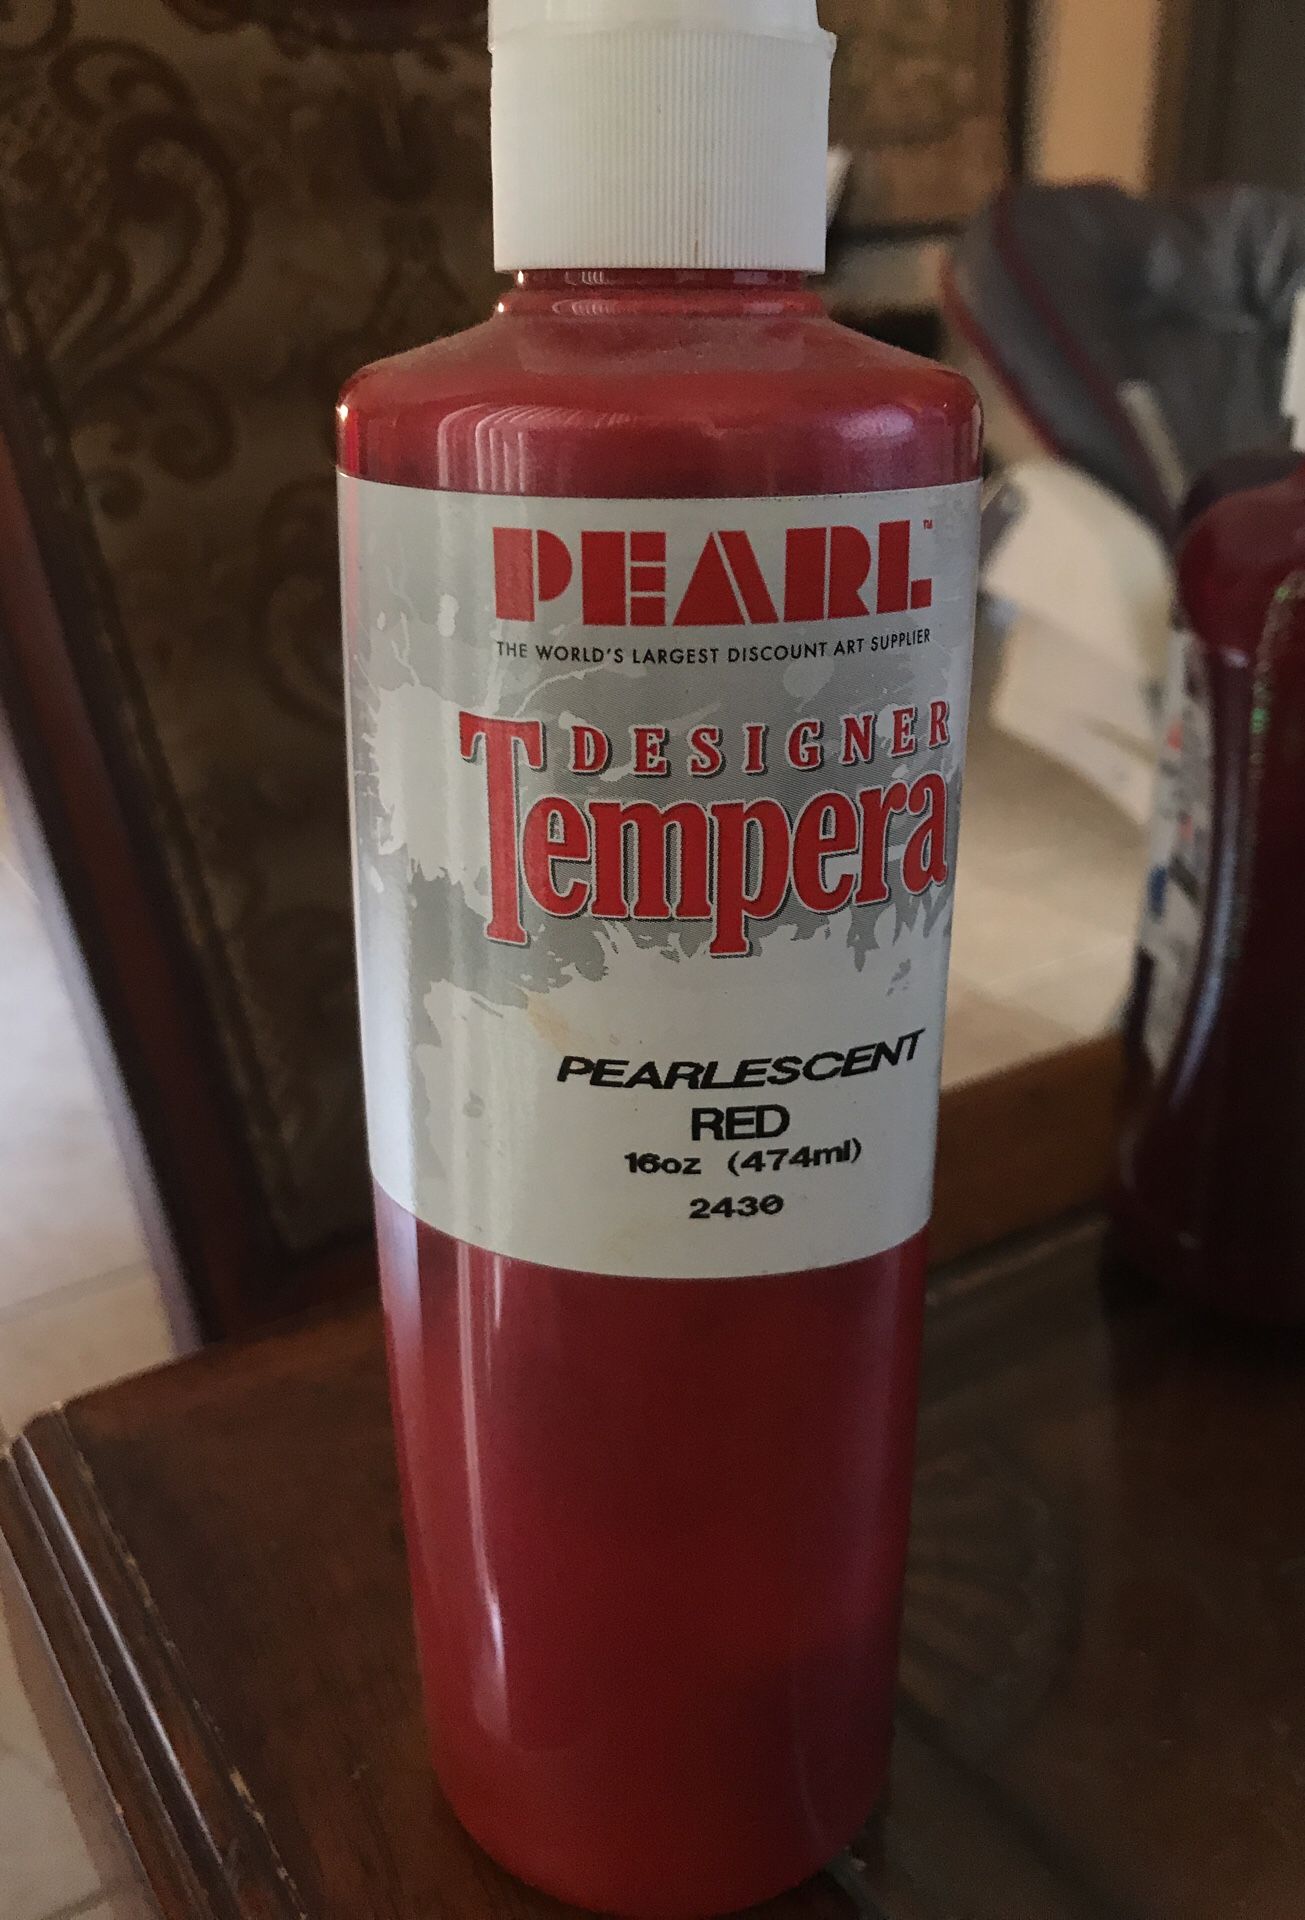 Pearl Tempera pearlescent red 16oz bottle